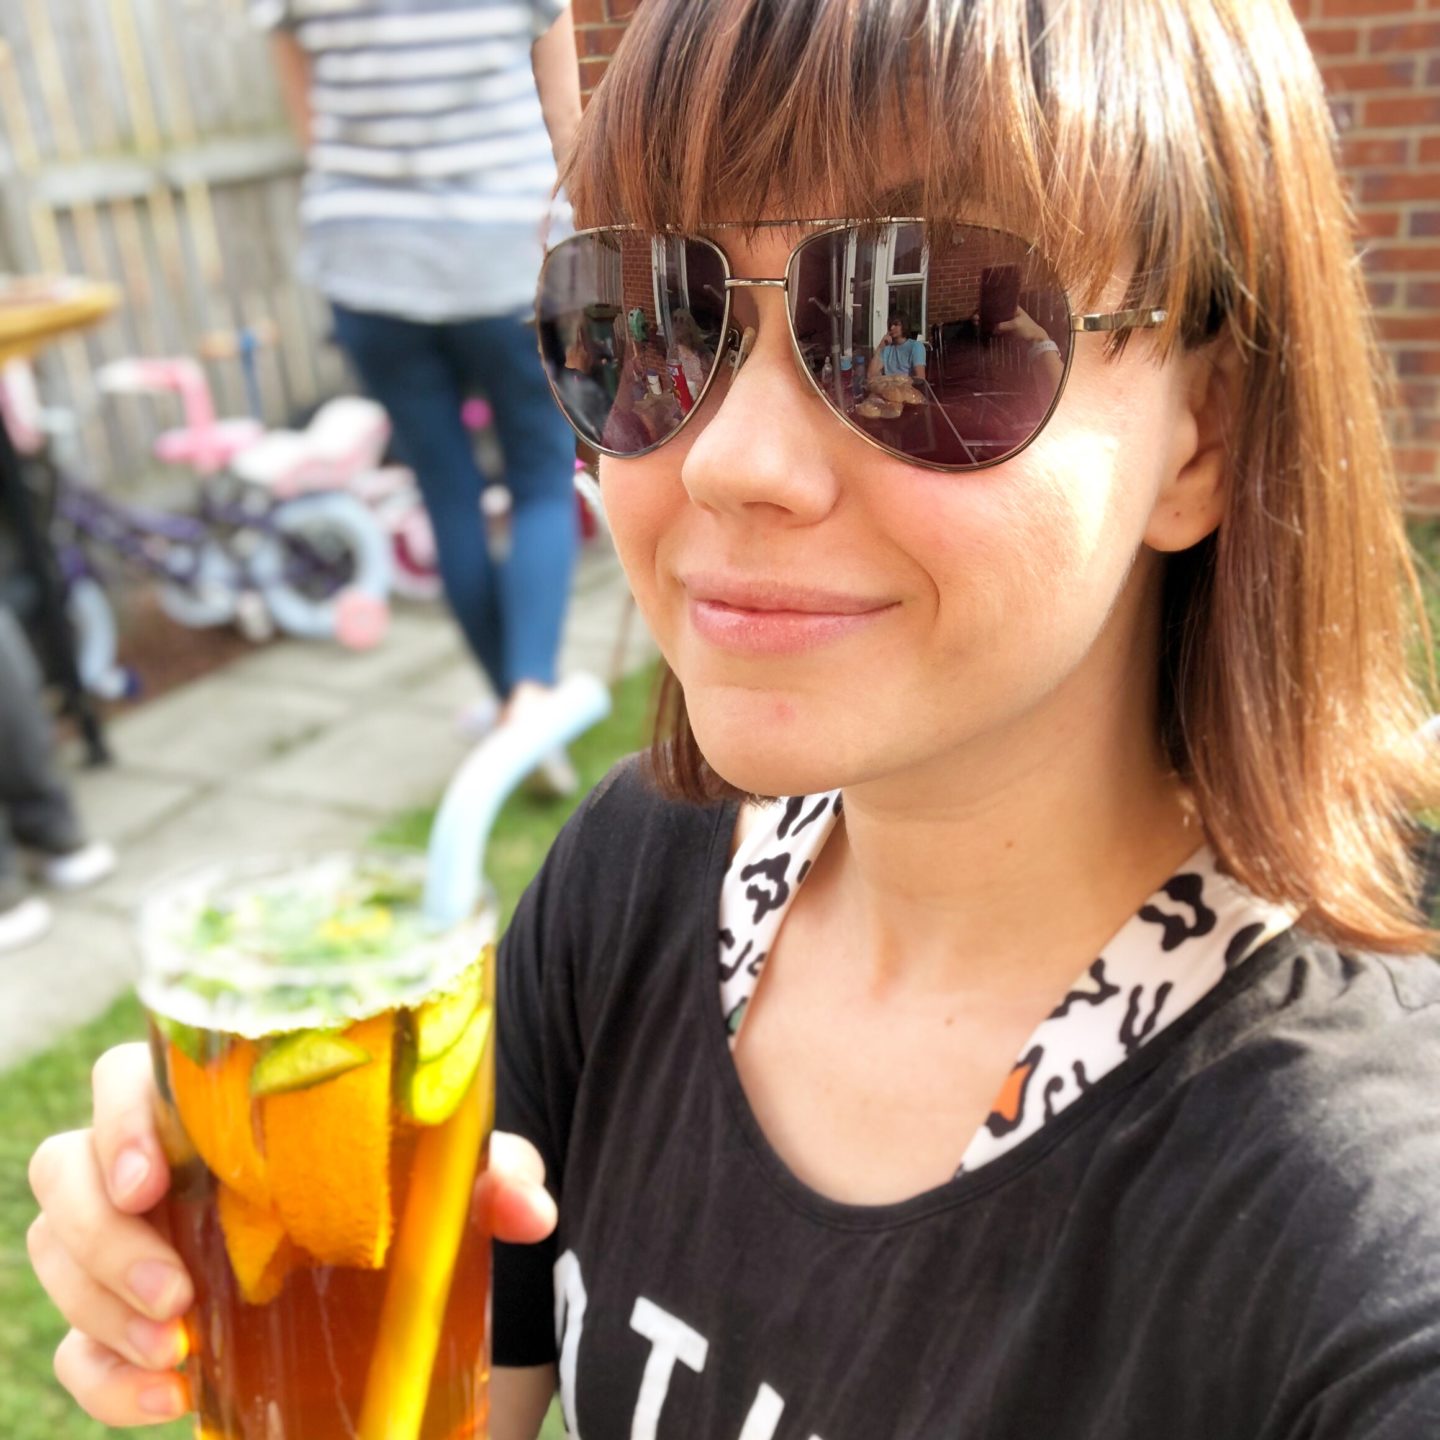 Woman drinking a glass of pimms